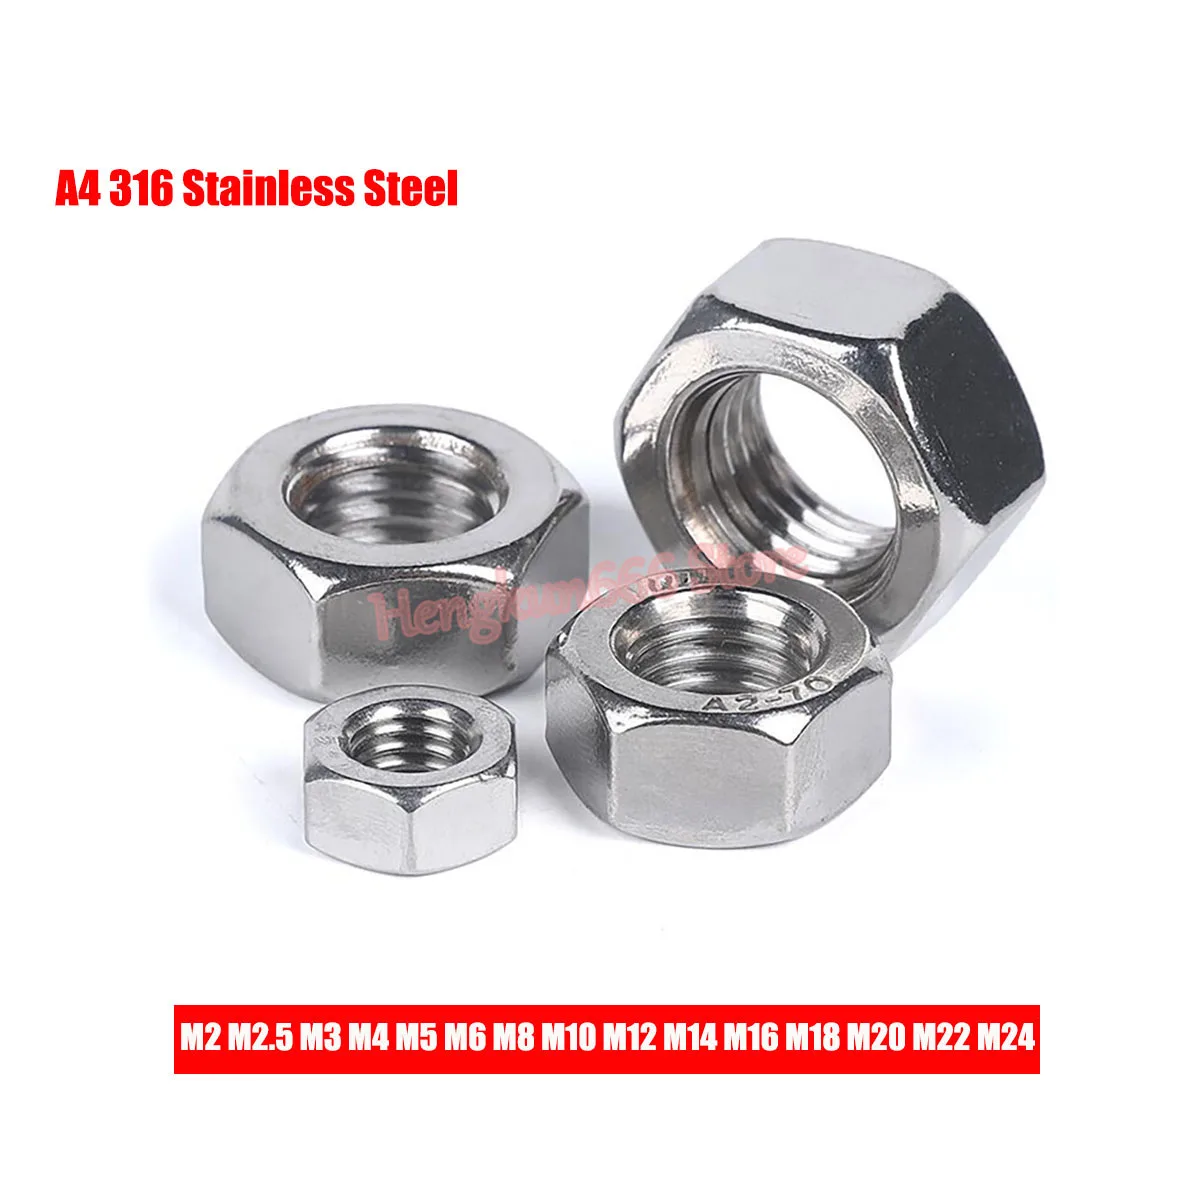 

Hexagon Hex Nuts A4 316 Stainless Steel M2 M2.5 M3 M4 M5 M6 M8 M10 M12 M14 M16 M18 M20 M22 M24 DIN934 hex Nut for Screw Bolts